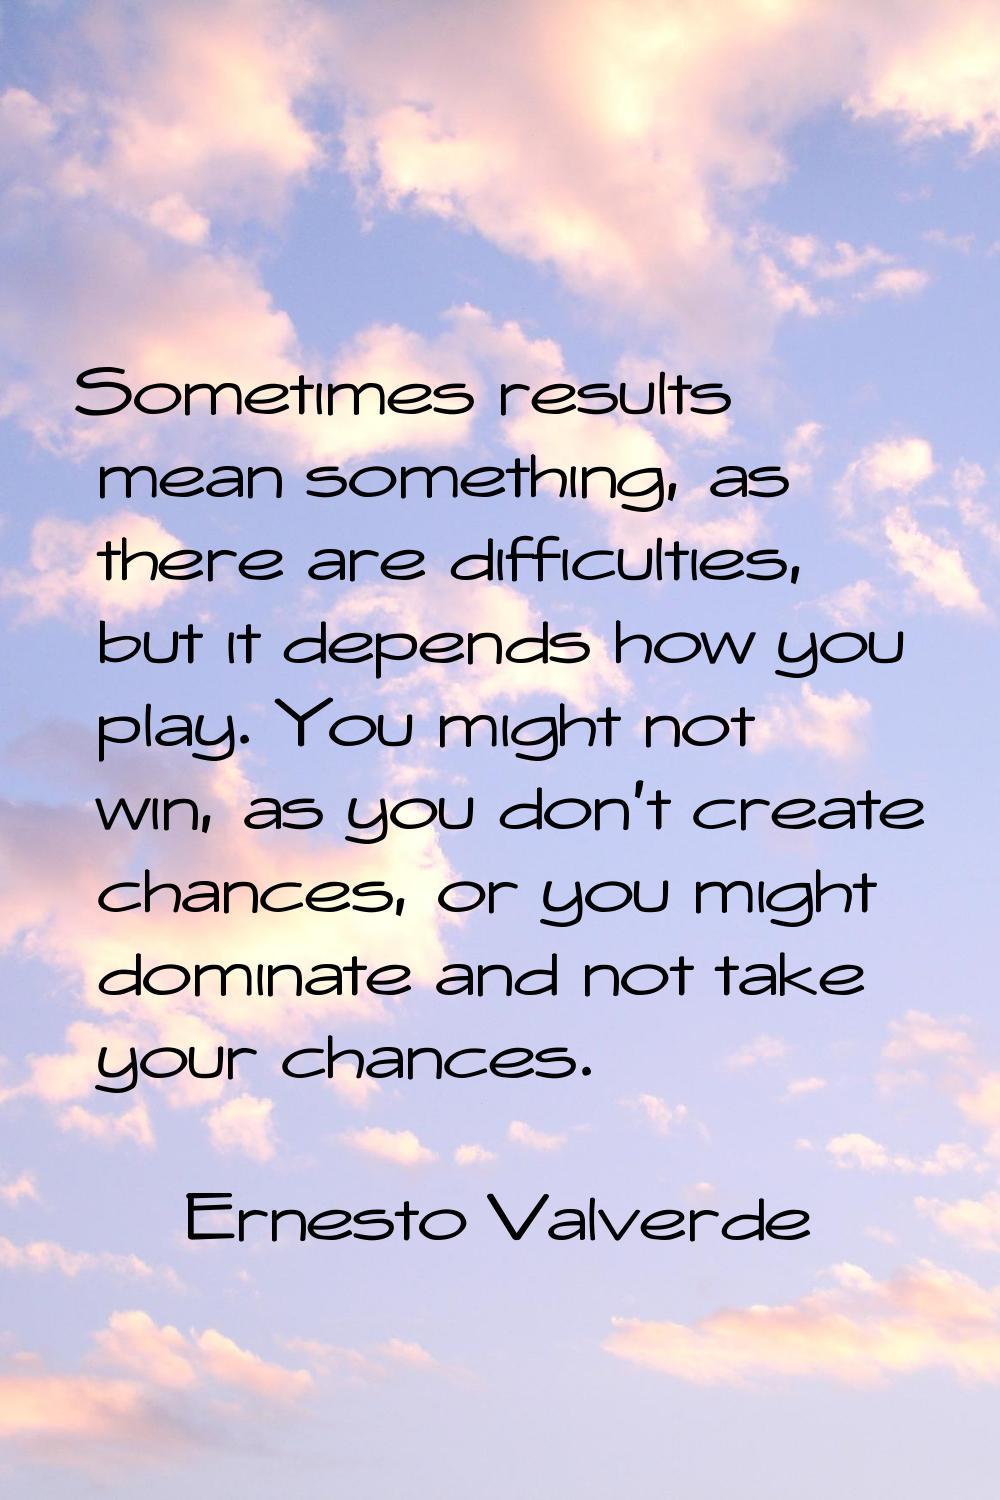 Sometimes results mean something, as there are difficulties, but it depends how you play. You might